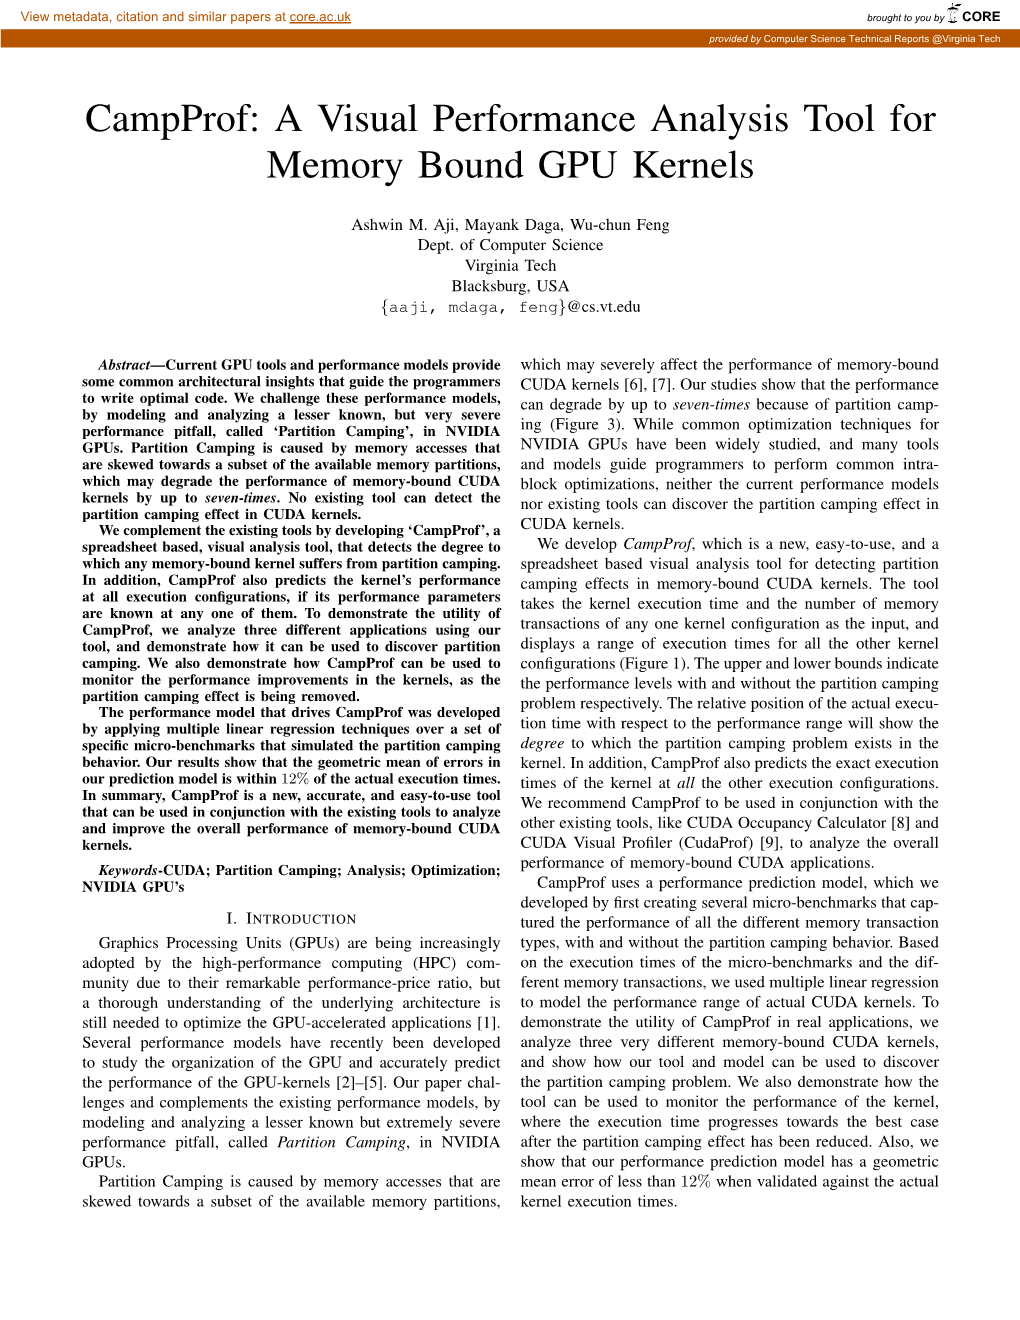 A Visual Performance Analysis Tool for Memory Bound GPU Kernels